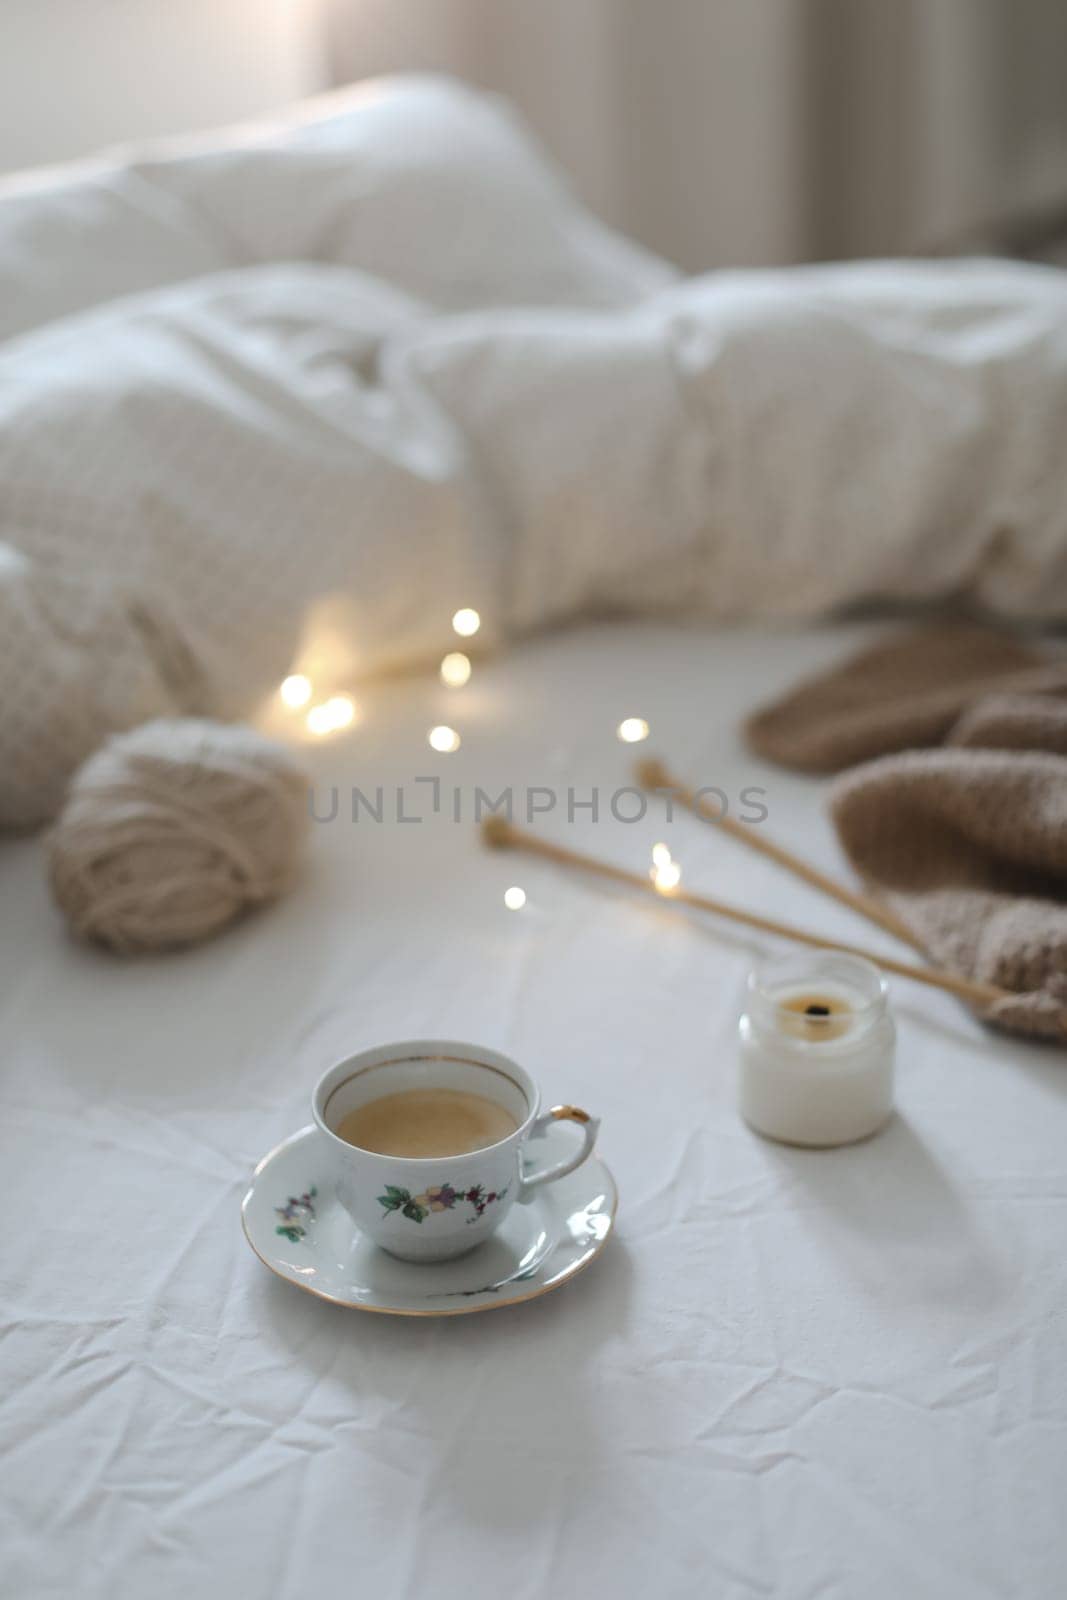 yarn and a cup of coffee on the bed. Hygge lifestyle, cozy mood. Handicraft day concept.